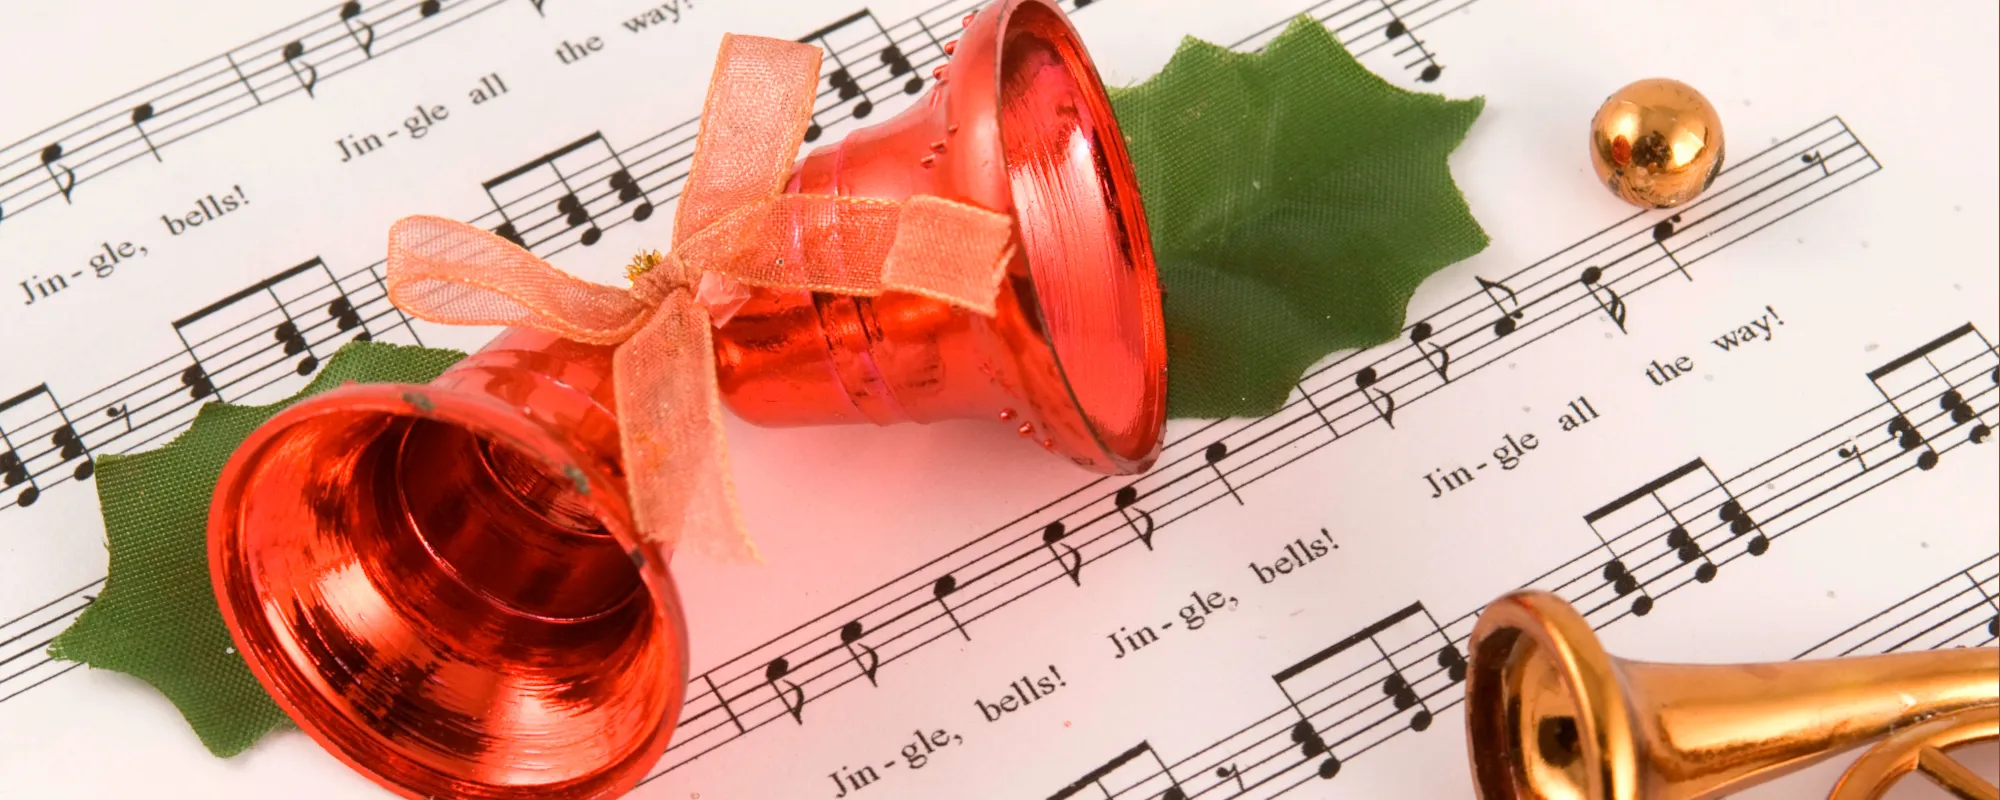 Sunday School Tune or Drinking Song?—The Meaning Behind the Christmas Classic ‘Jingle Bells’